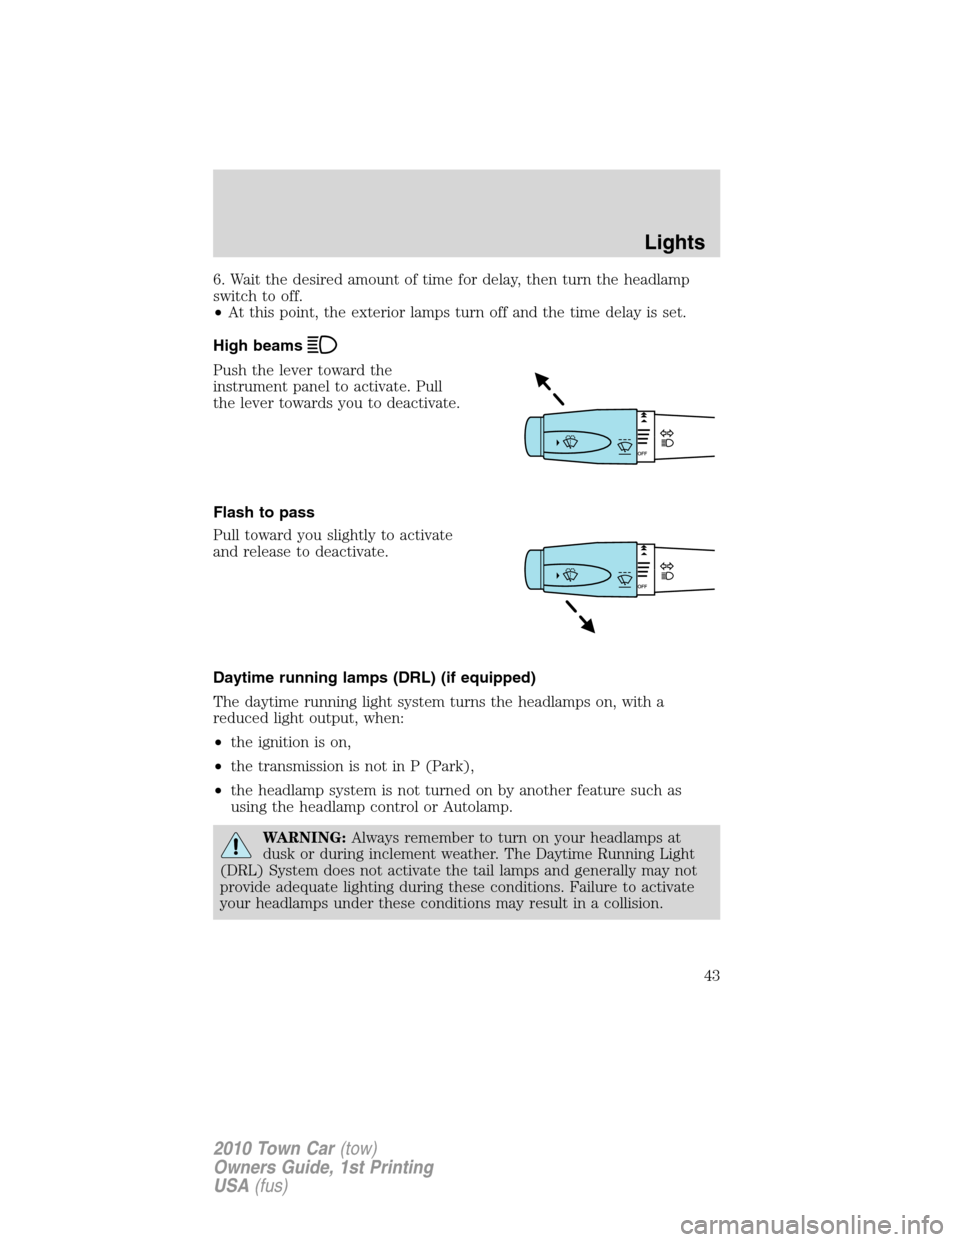 LINCOLN TOWN CAR 2010  Owners Manual 6. Wait the desired amount of time for delay, then turn the headlamp
switch to off.
•At this point, the exterior lamps turn off and the time delay is set.
High beams
Push the lever toward the
instru